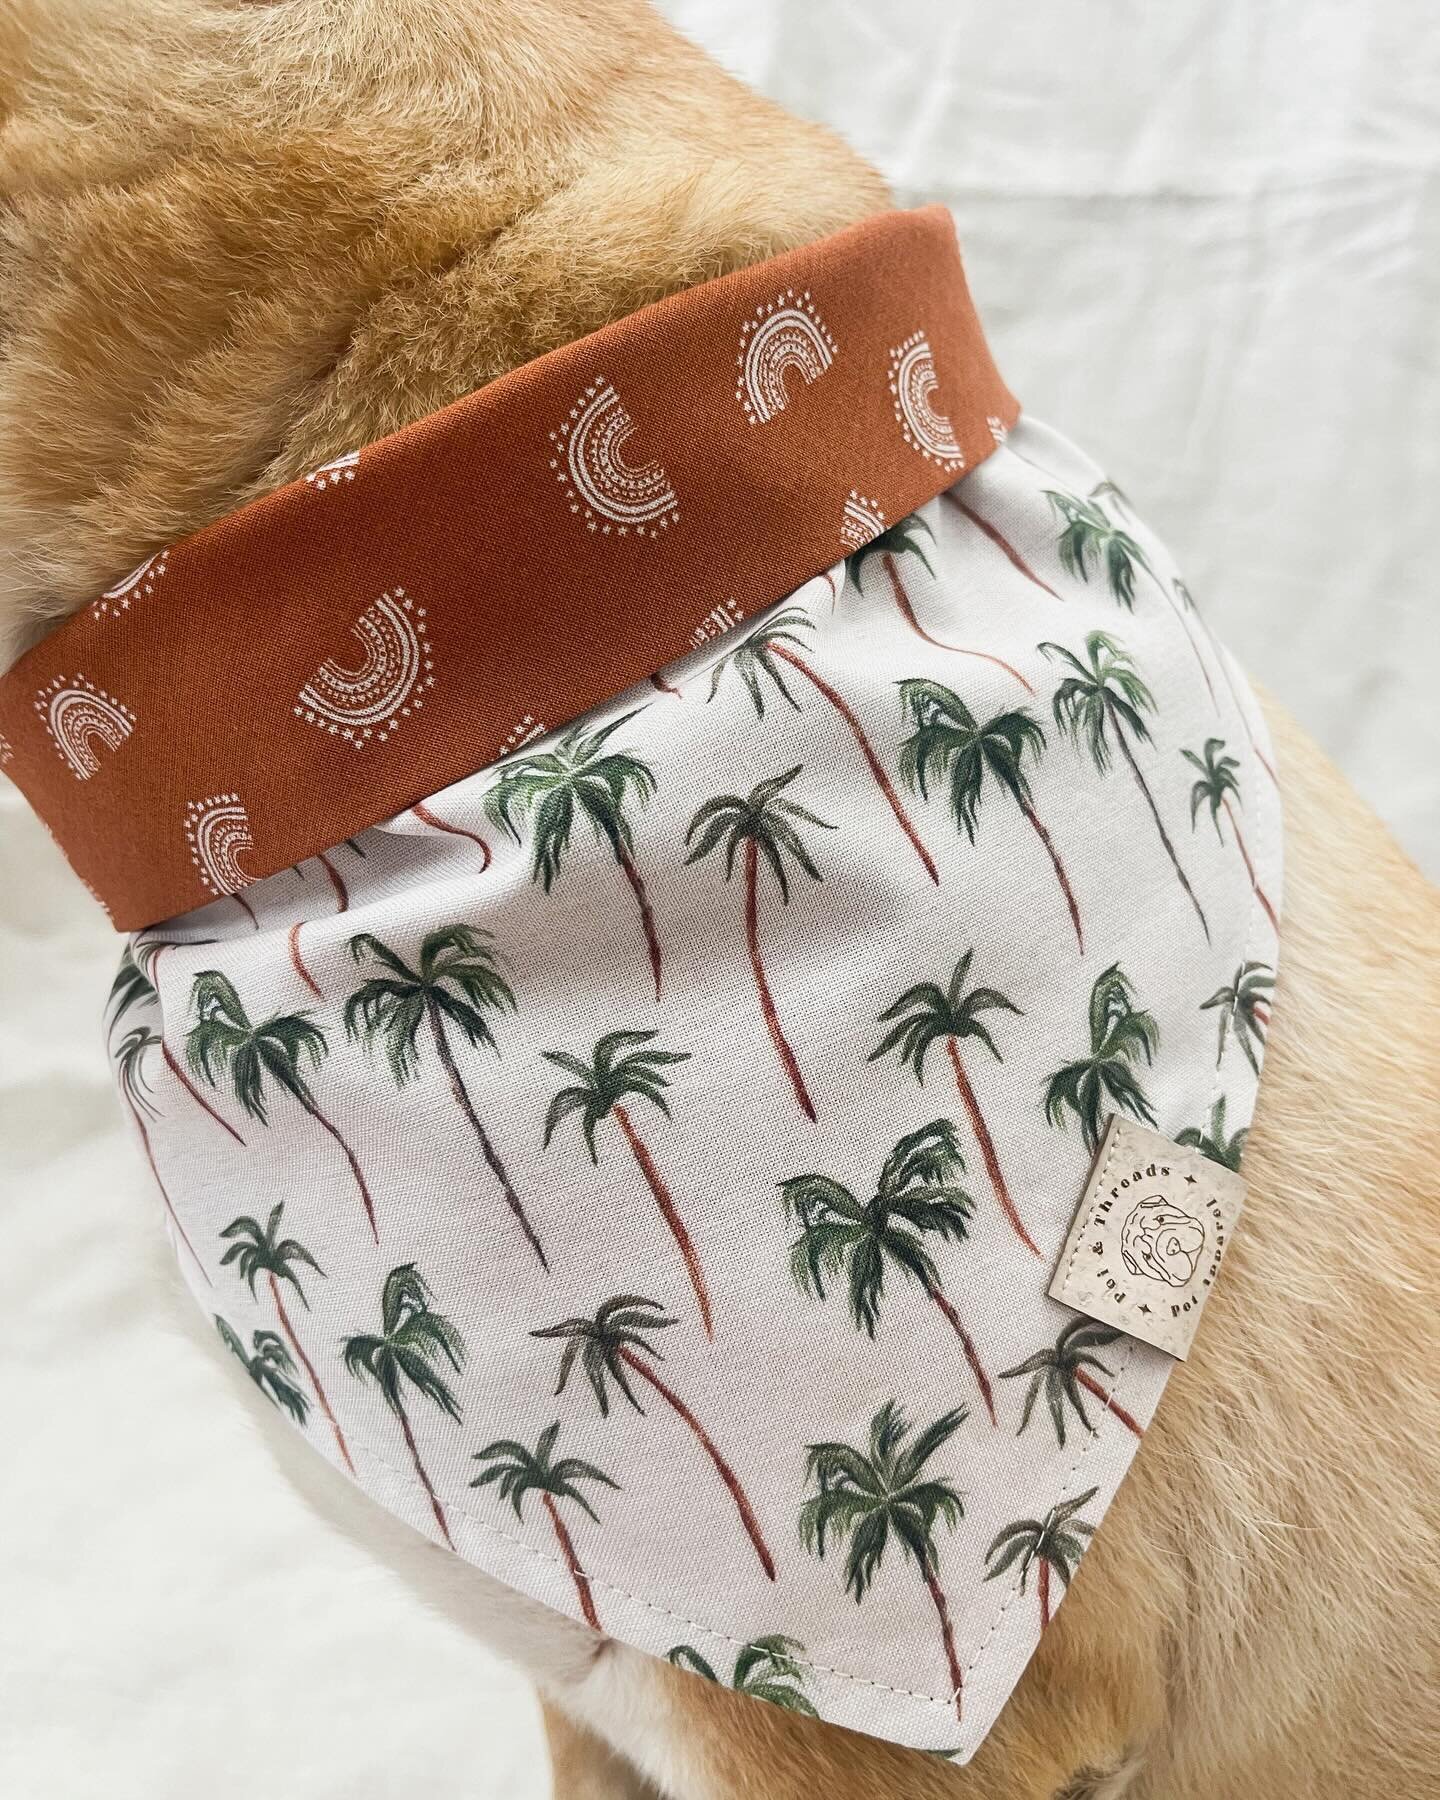 New bandanas are now available online! If you&rsquo;re local you can save on shipping by picking up your order at an upcoming event!

Next event is @sanford_pintsnpaws! Link in bio for more info 🐾

Nova is wearing the SoCal &lsquo;dana in size mediu